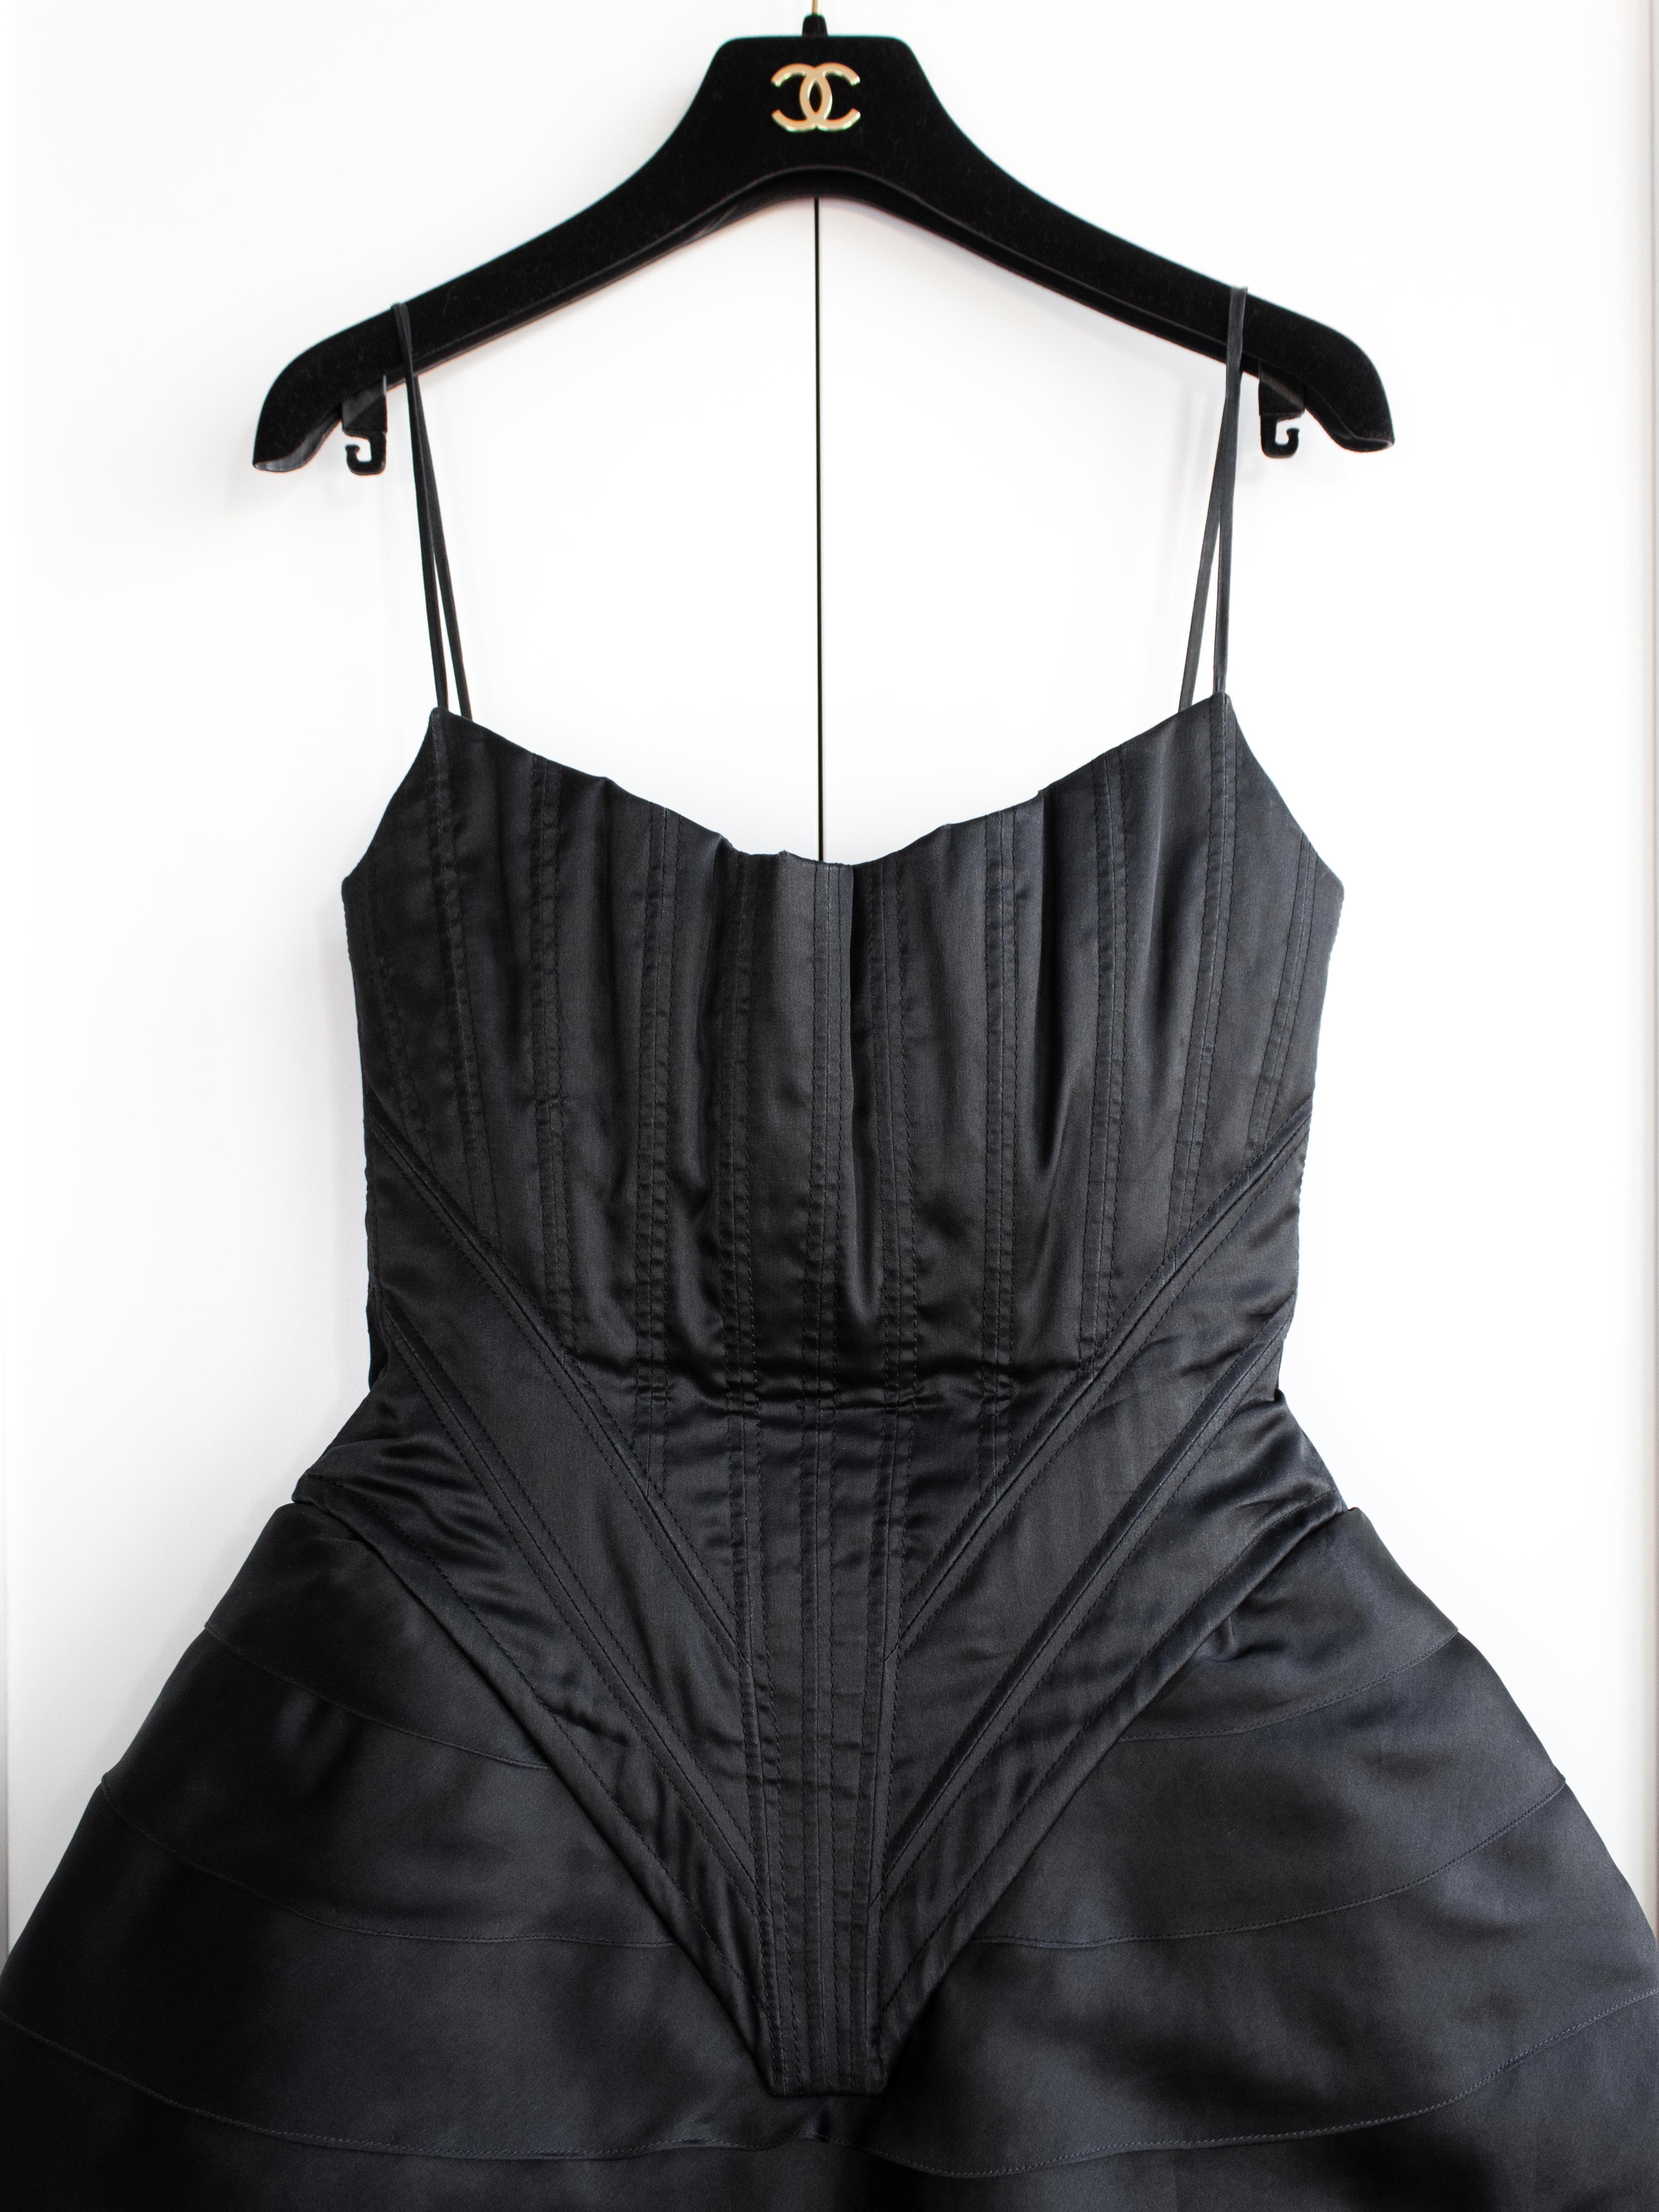 Chanel Vintage Haute Couture Fall/Winter 1992 Black Satin Corset Gown Dress For Sale 3